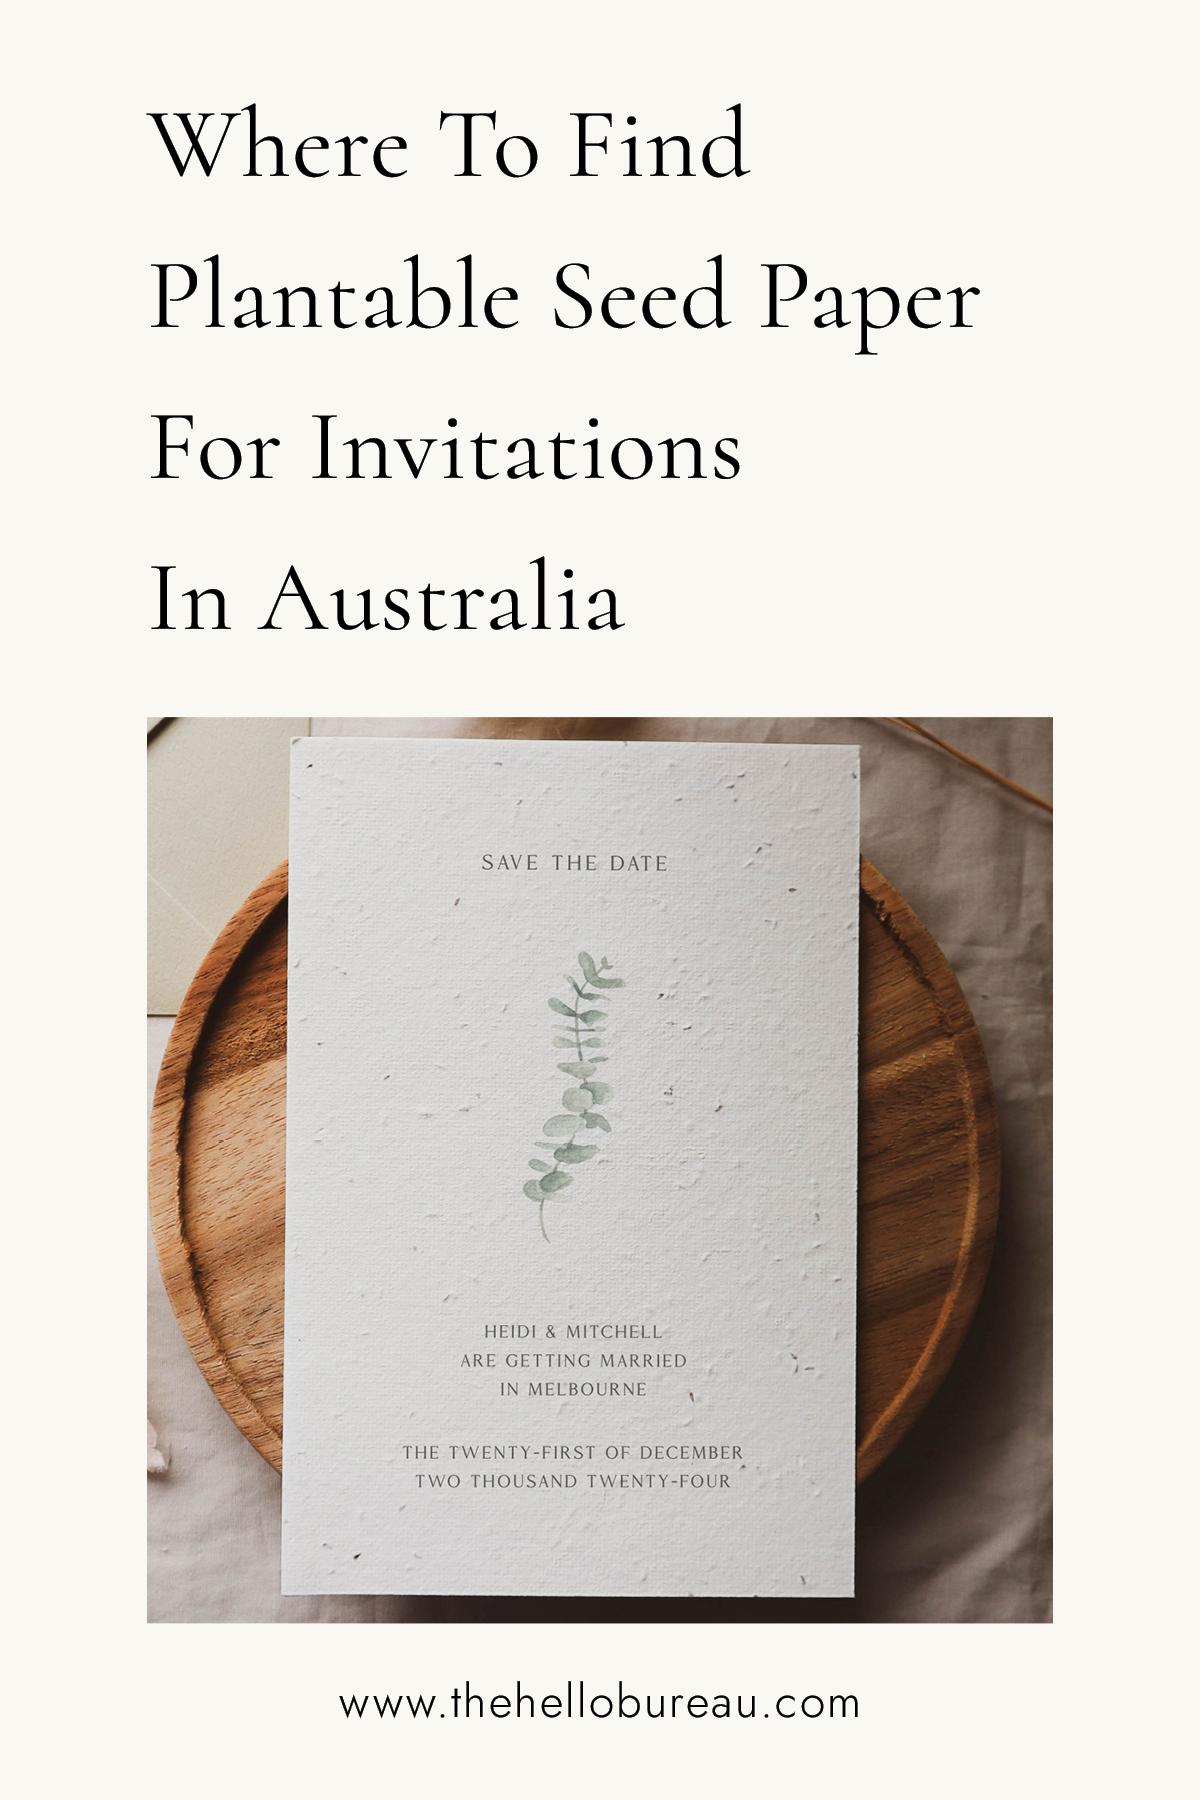 Plantable Seed Paper For Invitations In Australia